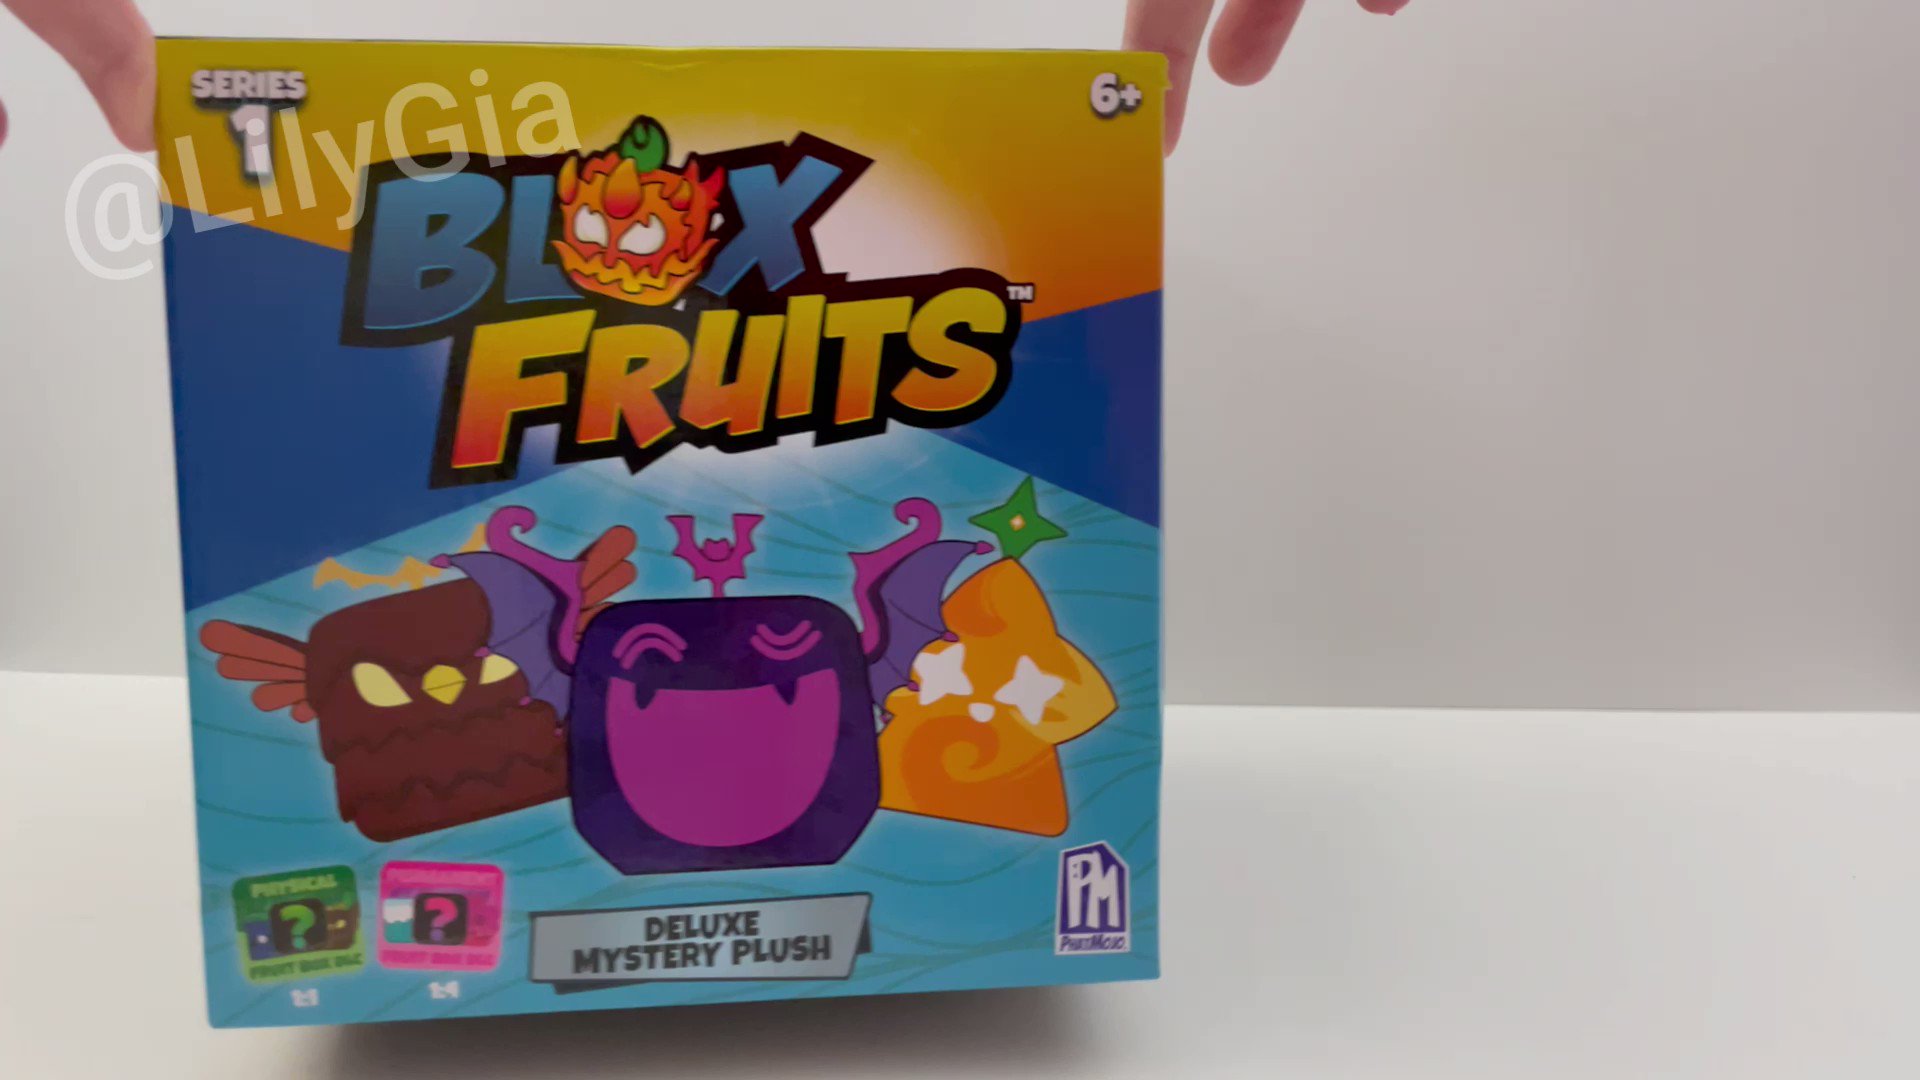 Lily on X: Blox Fruits toys are out! My video opening them coming